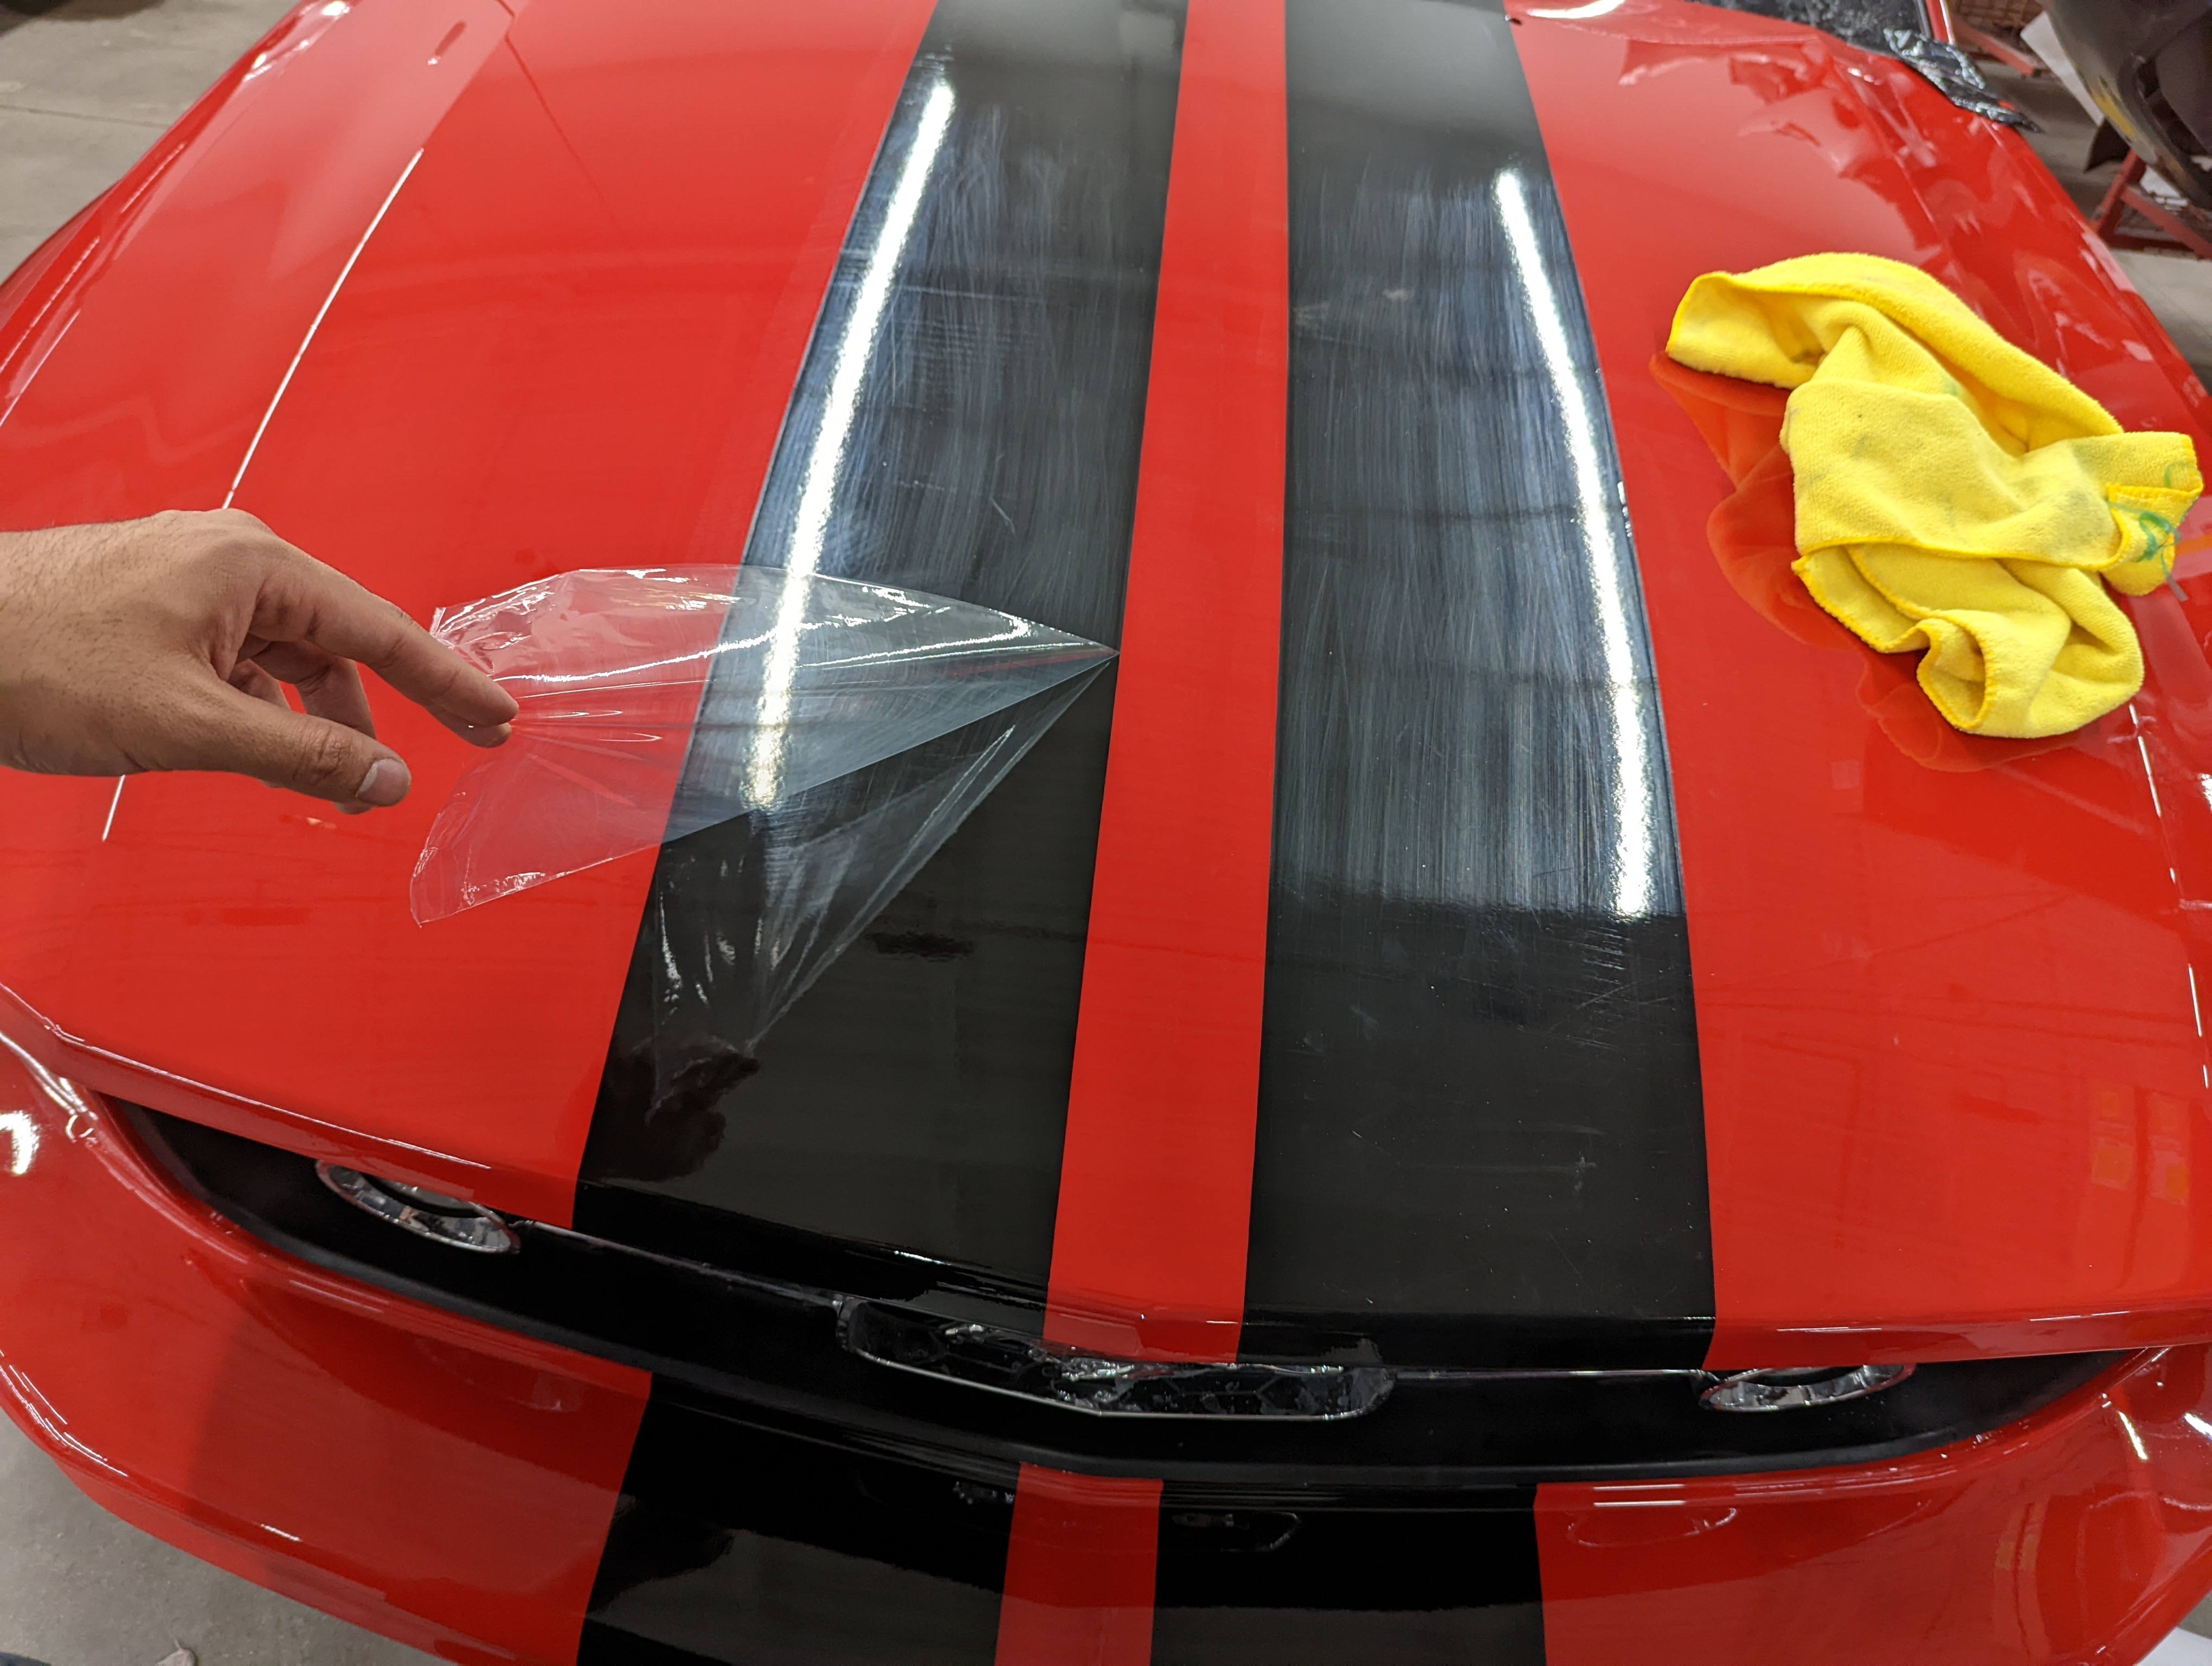 2006 Ford Mustang Vinyl Stripes. Removing the anti-scratch cap sheet after installation. Notice the lack of scratches from installation because of protective cap sheet.